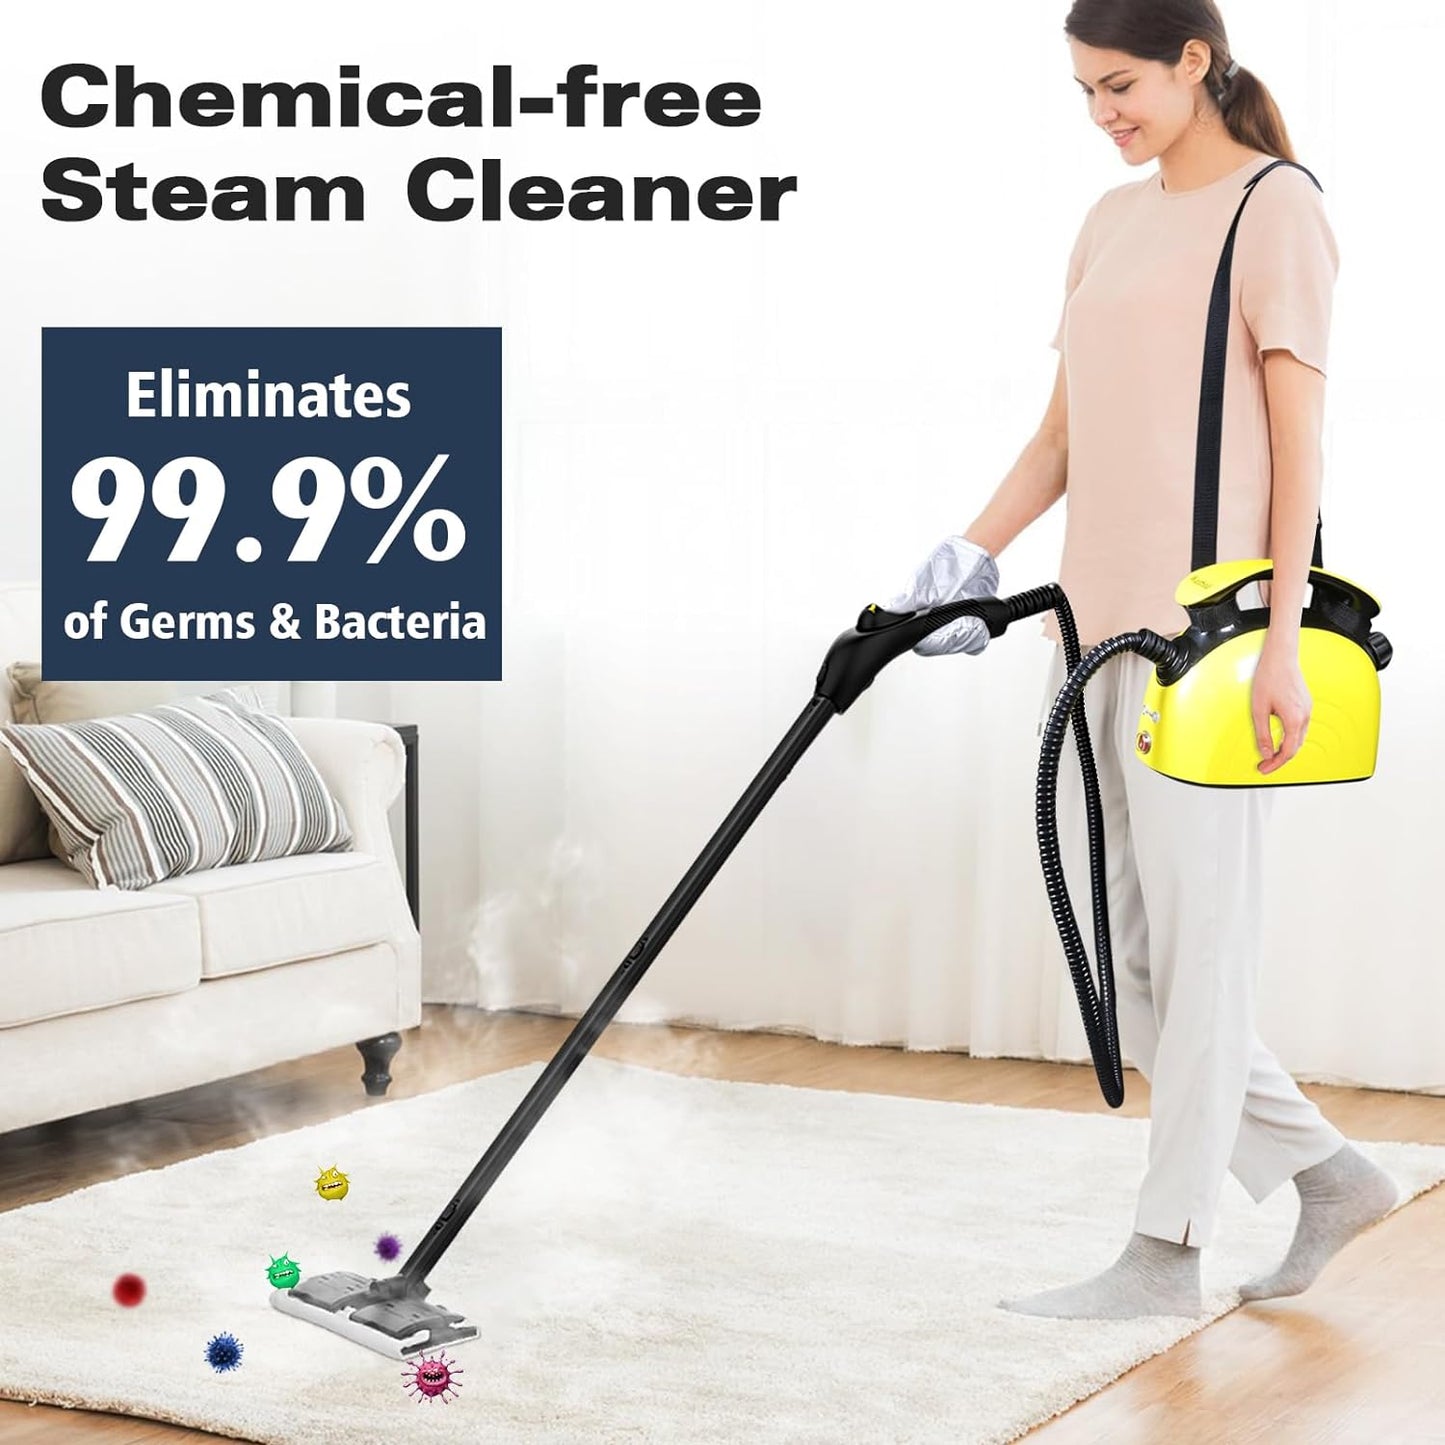 Manufacturer's outlet Steam Cleaner, Multipurpose Powerful Steamer with 21 Accessories, Portable Handheld Steam Mop with 38OZ Tank, Natural Cleaning for Home Use, Floor, Grout, Tile, Couch, Carpet, Car